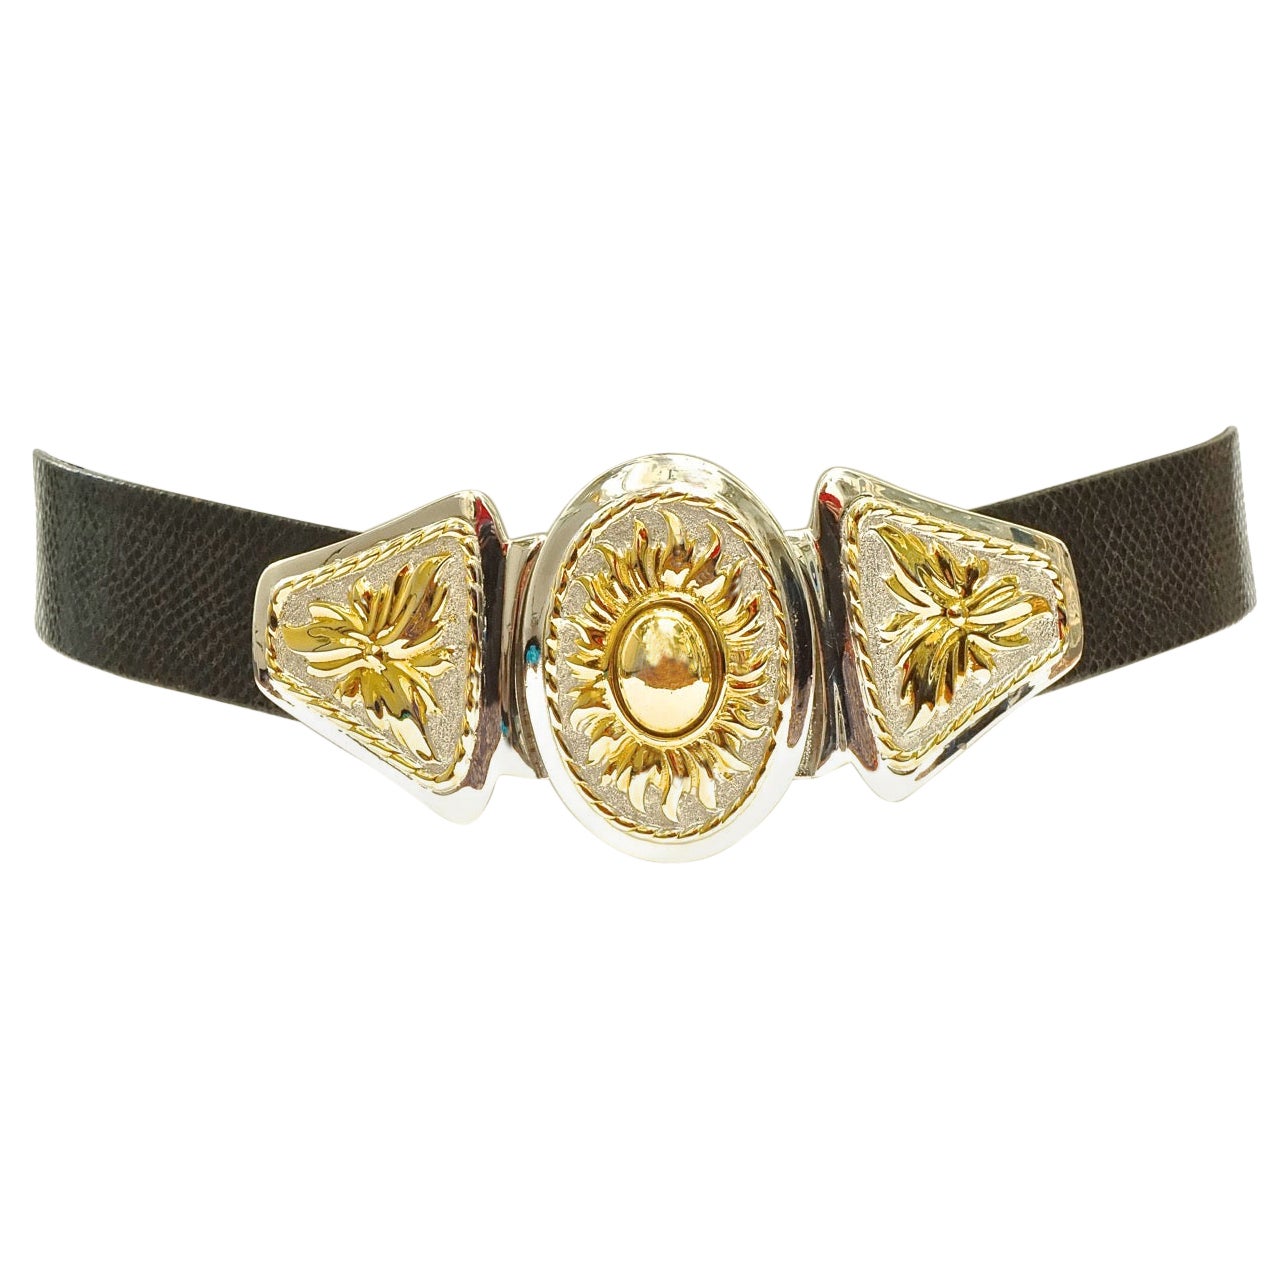 Alexis Kirk Black Leather Snakeskin Belt with Gold Plated Silver Plated Buckle